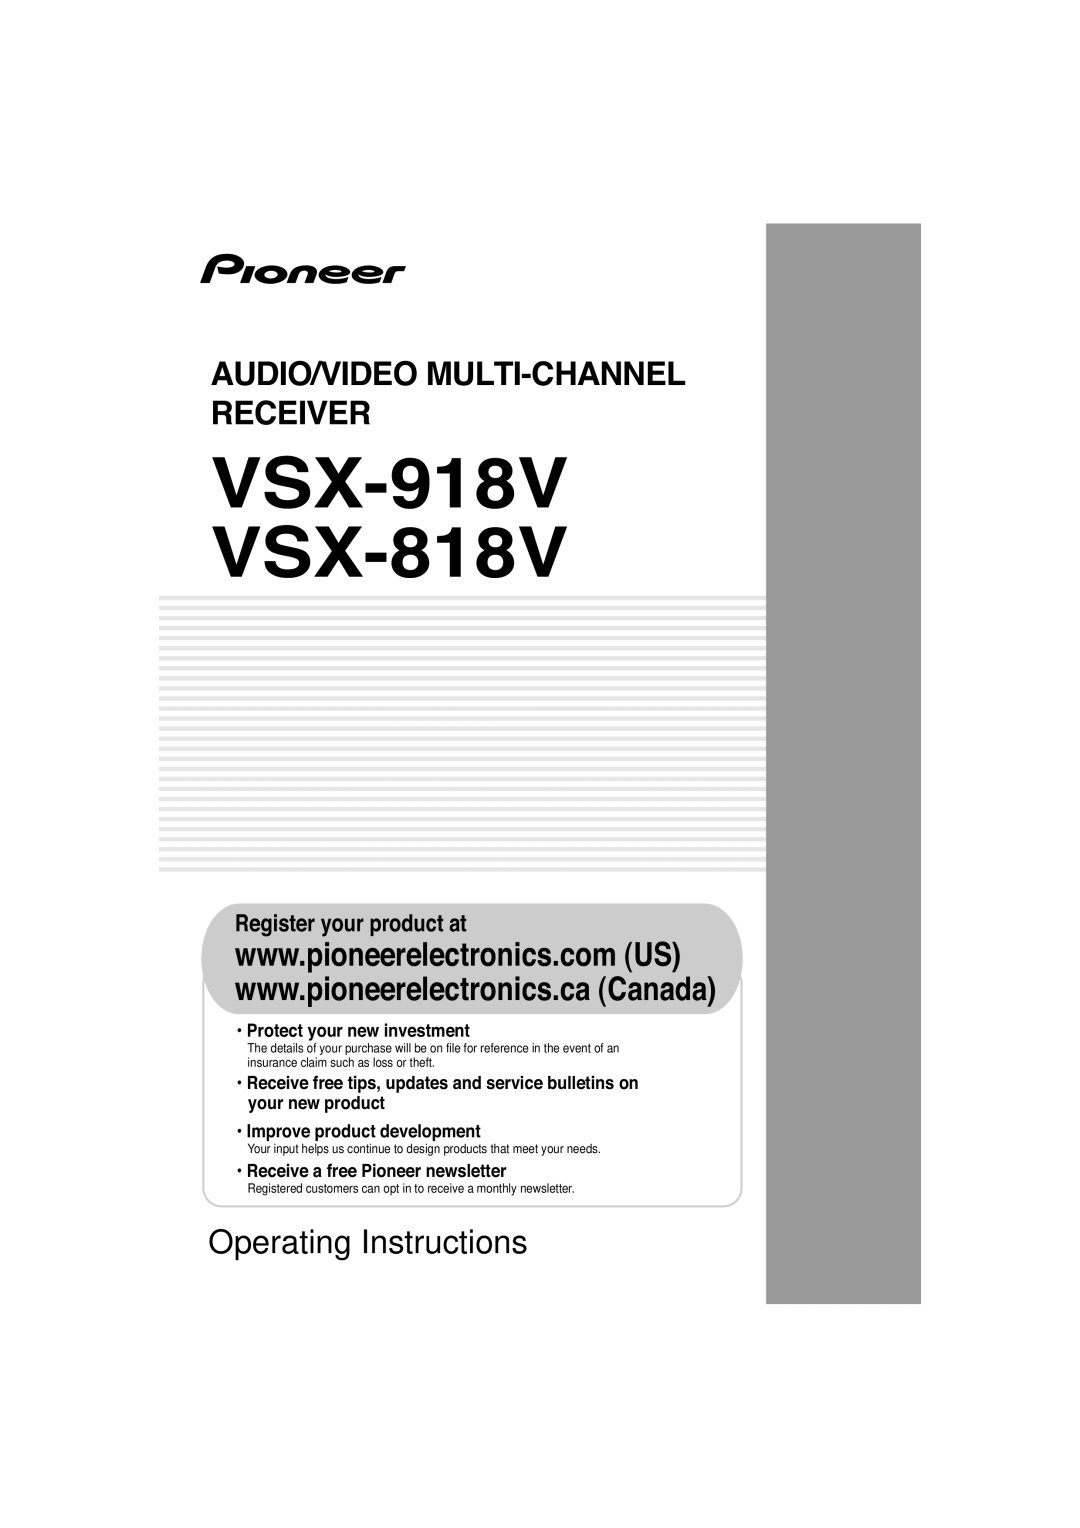 Pioneer operating instructions Protect your new investment, Improve product development, VSX-918V VSX-818V 